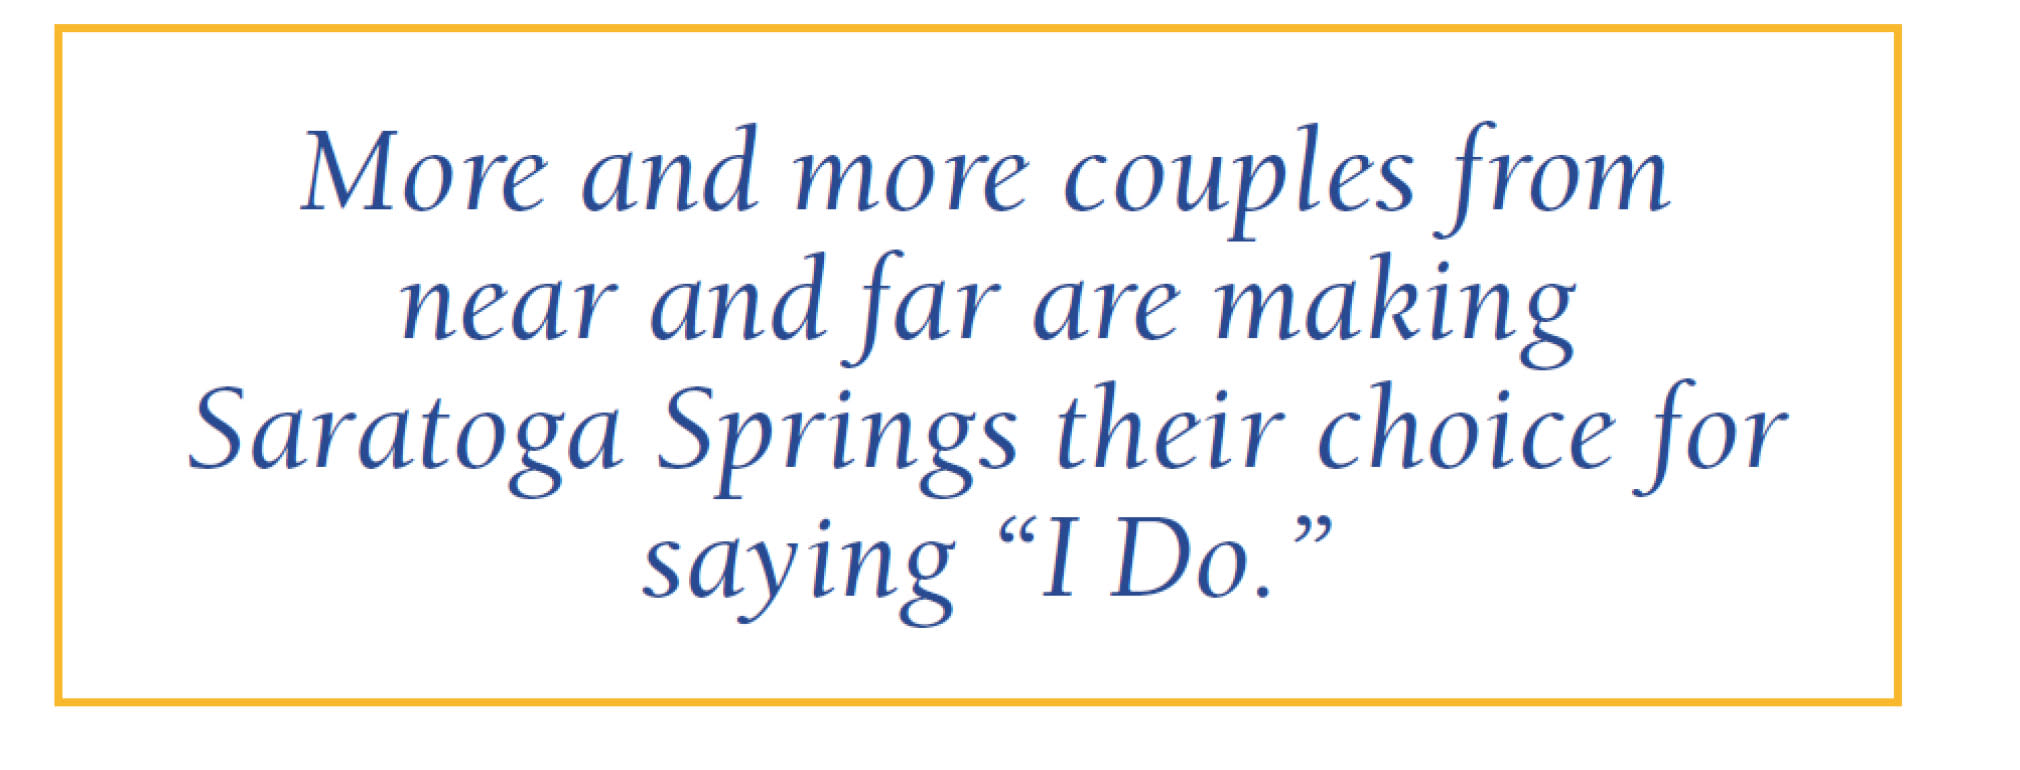 More and more couples from near and far are making Saratoga Springs their choice for saying "I Do."